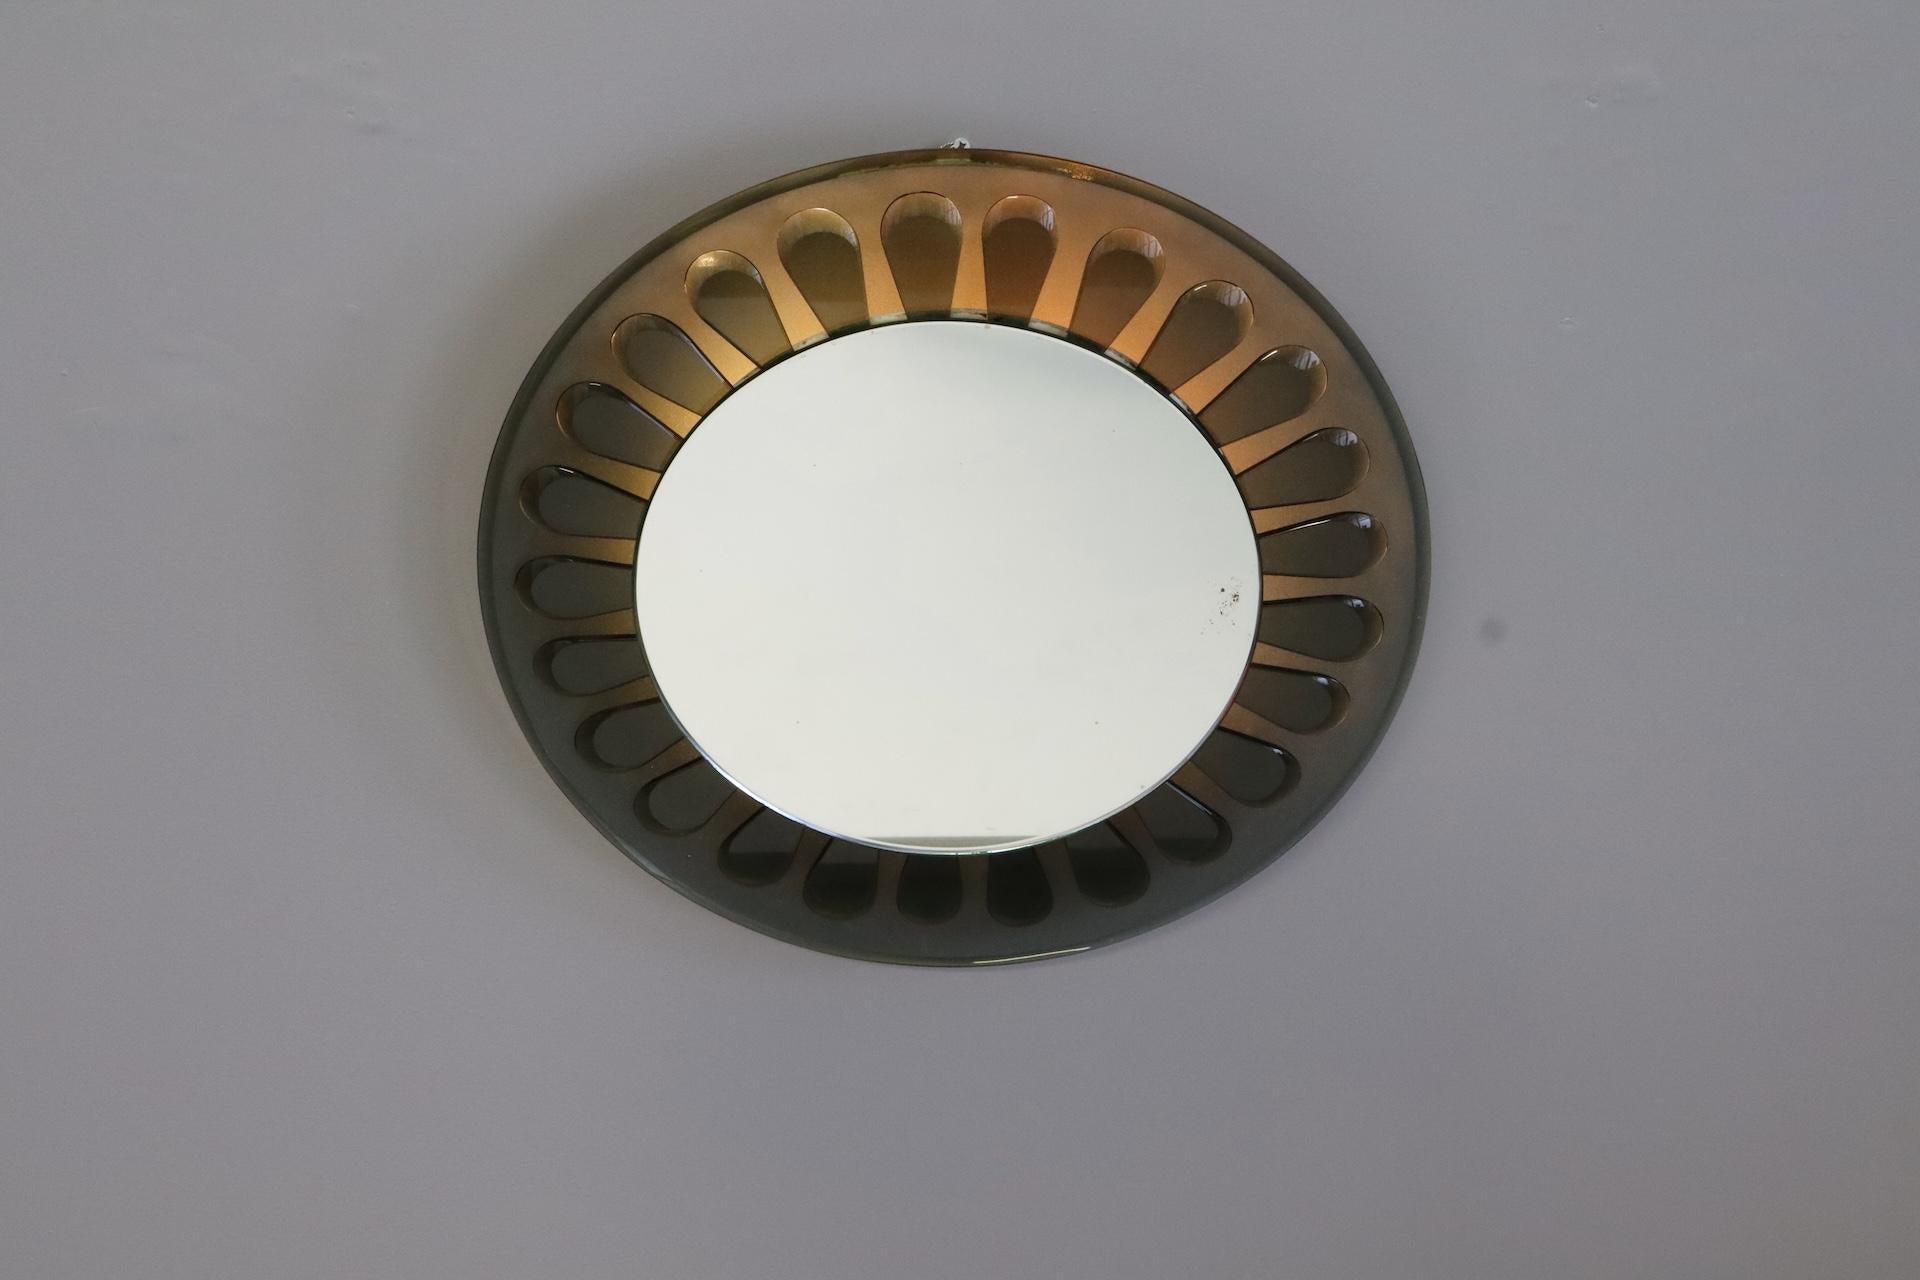 Flower-shaped wall mirror by Max Ingrand for Fontana Arte Italia 1964 For Sale 8